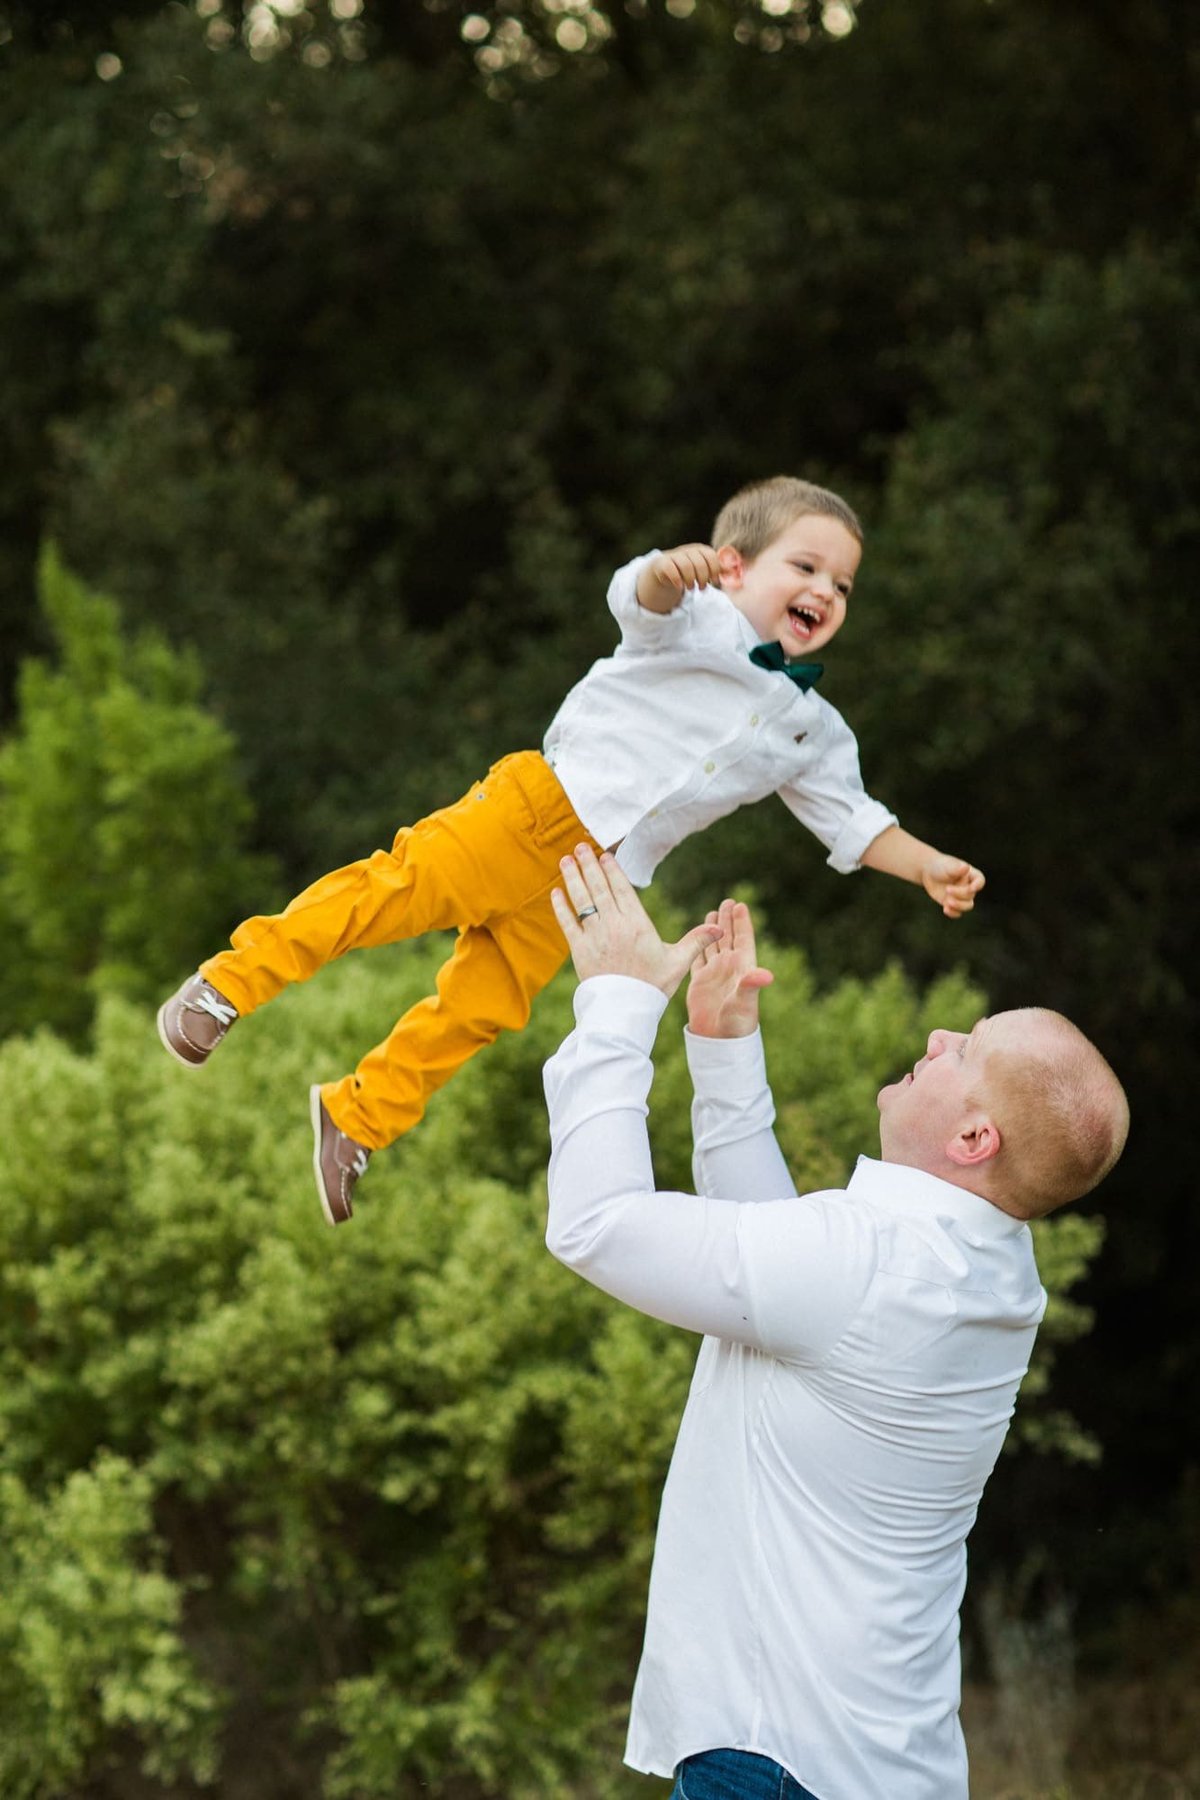 Father tosses young son in the air as the little boy smiles